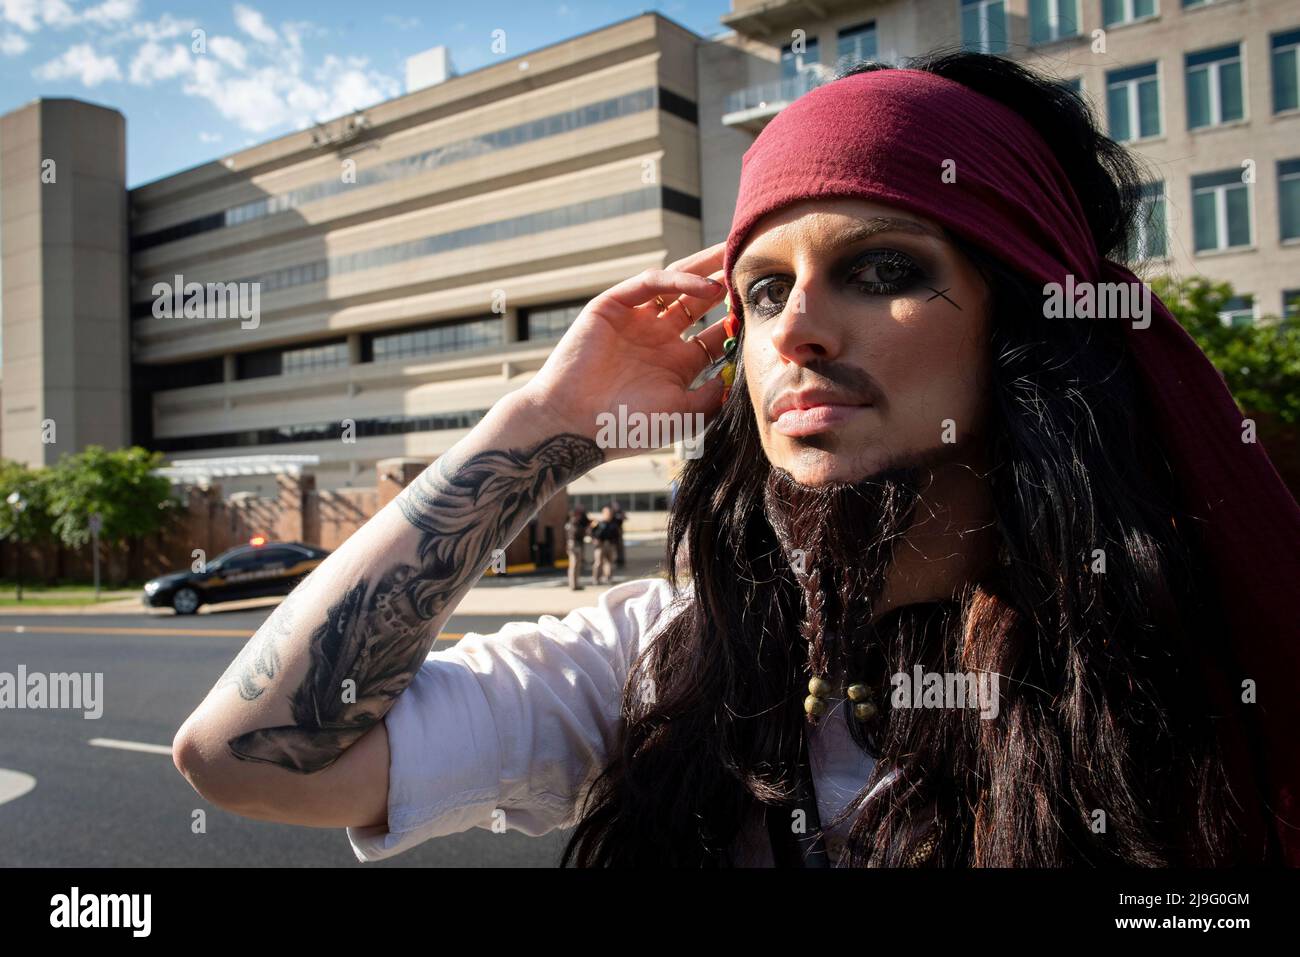 Captain Jack Sparrow, Haley Walz, 27, of East Liverpool, Ohio, drove five-hours today to see Johnny Depp depart the Fairfax County Courthouse, in Fairfax, during his civil trial with Amber Heard, Monday, May 16, 2022. She is driving back home this evening. Depp brought a defamation lawsuit against his former wife, actress Amber Heard, after she wrote an op-ed in The Washington Post in 2018 that, without naming Depp, accused him of domestic abuse. Credit: Cliff Owen/CNP Stock Photo